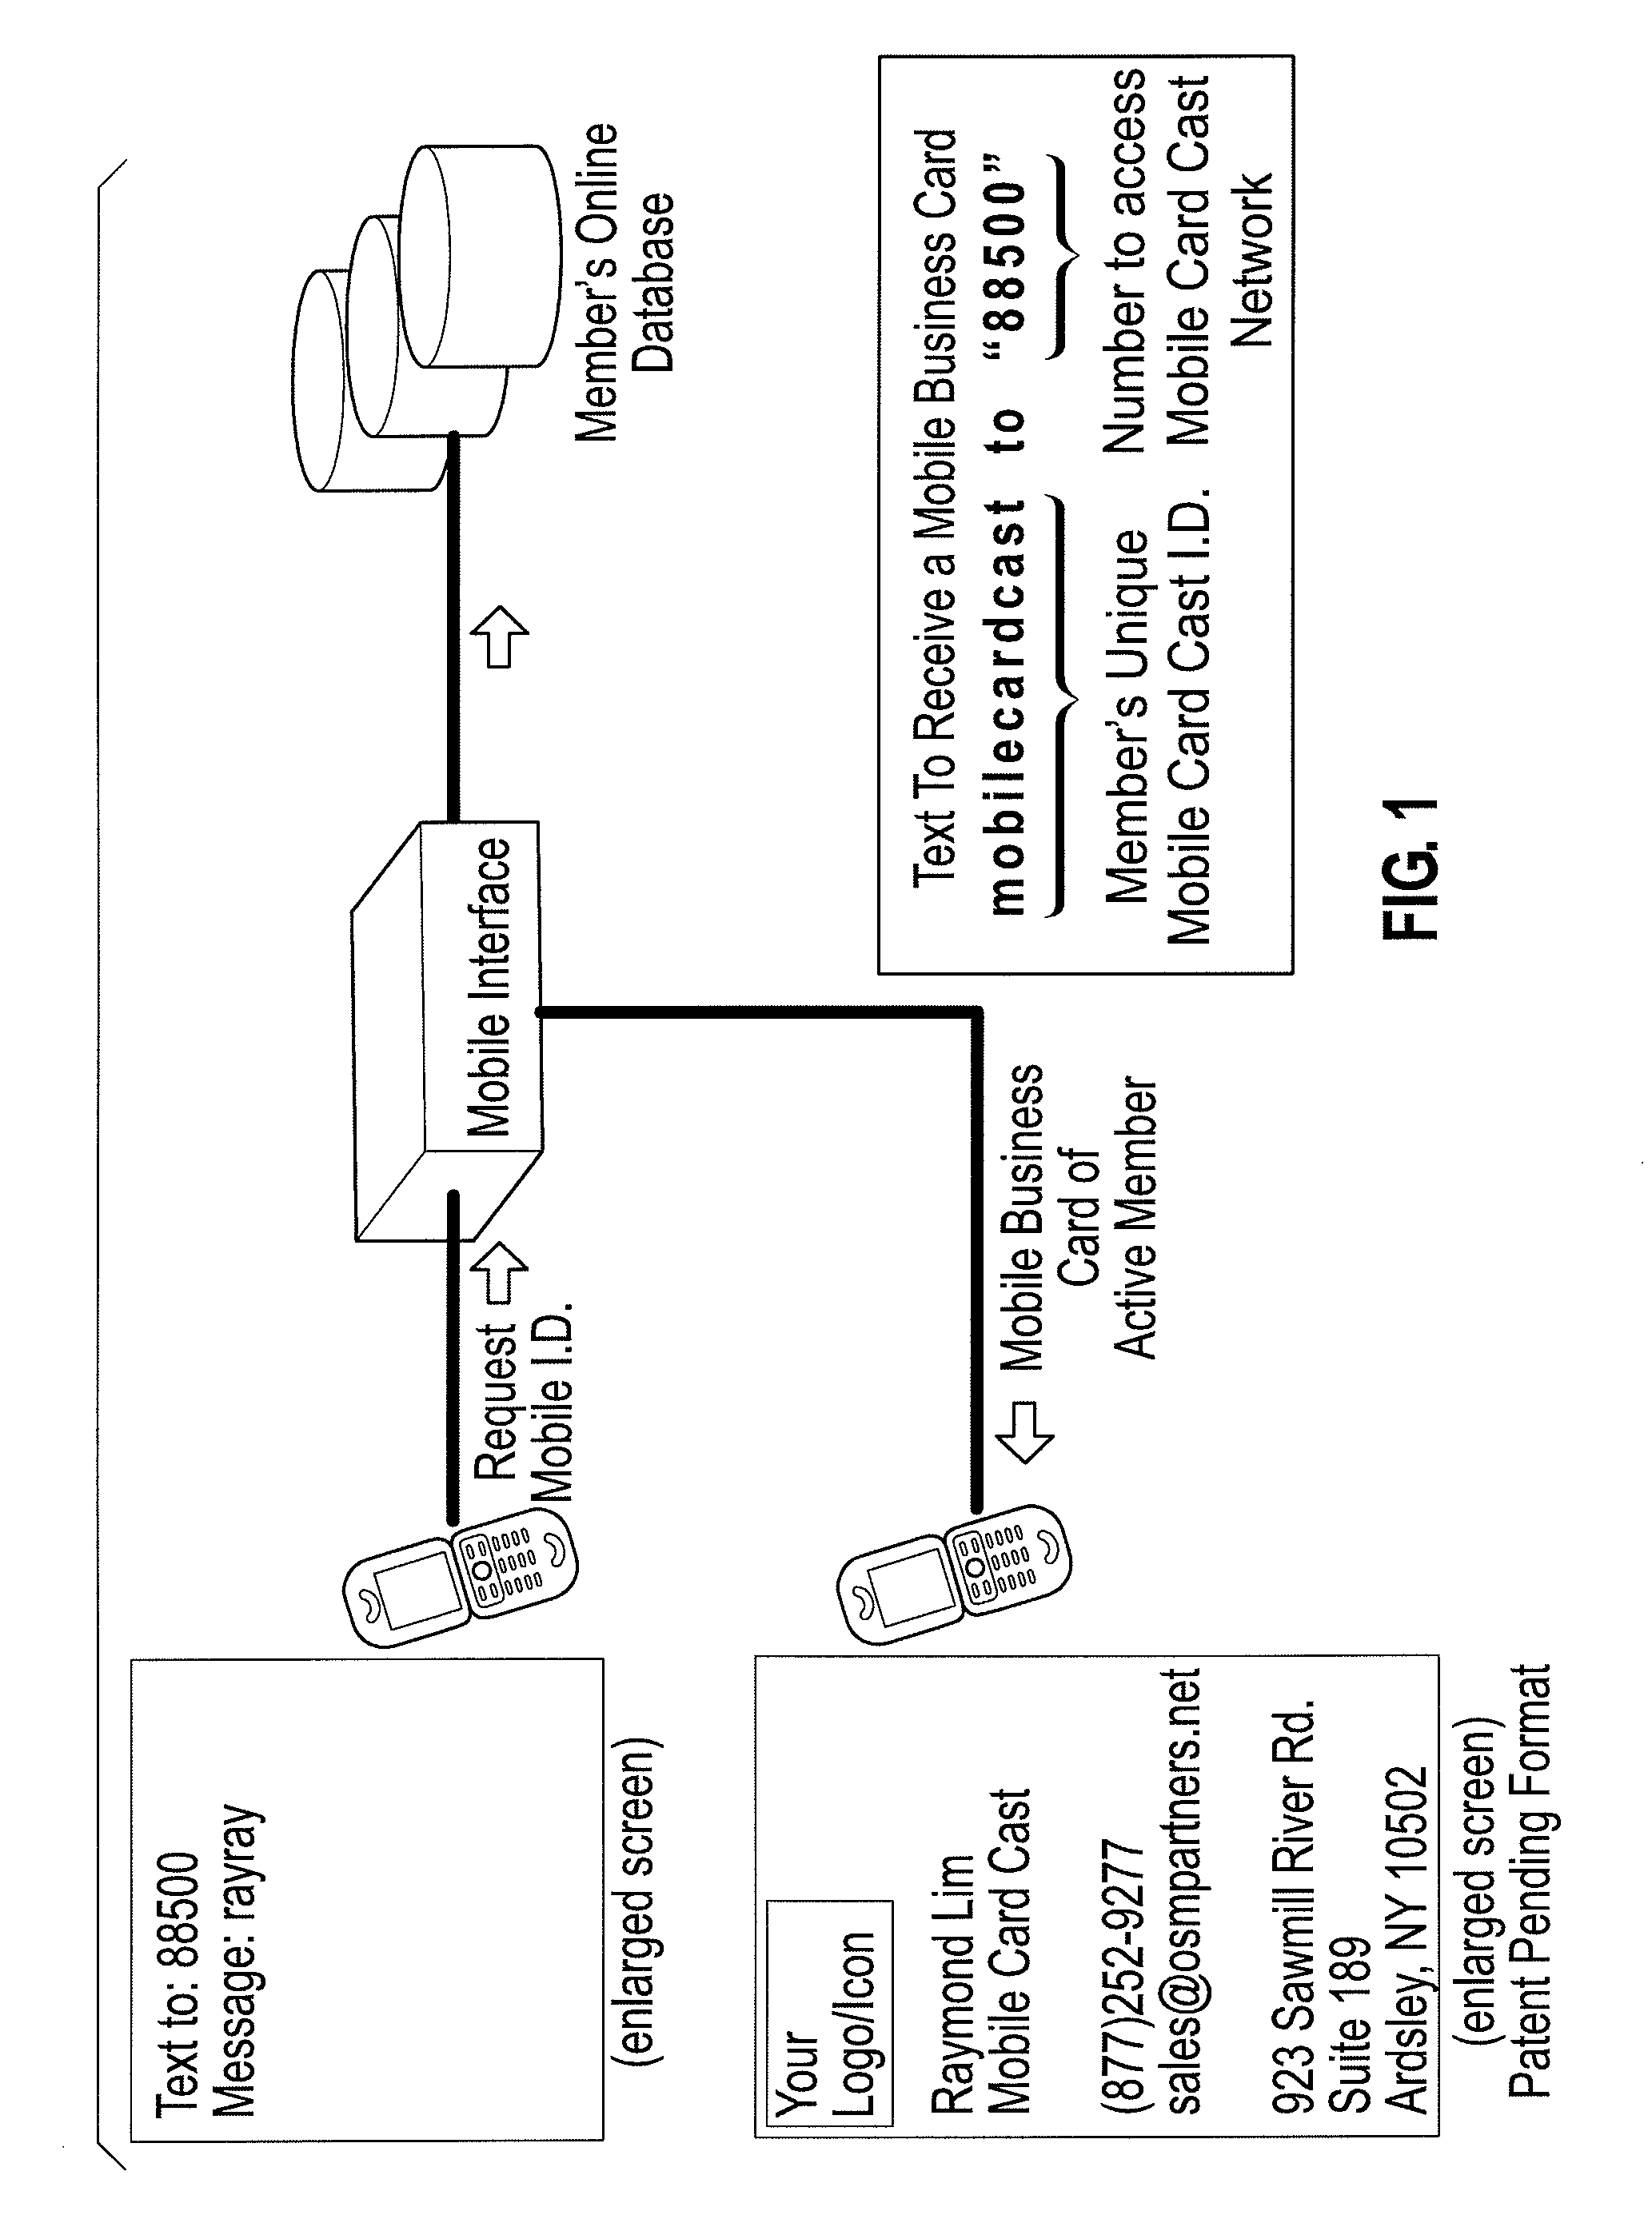 System and method for conveying personal information through cellular text messaging services